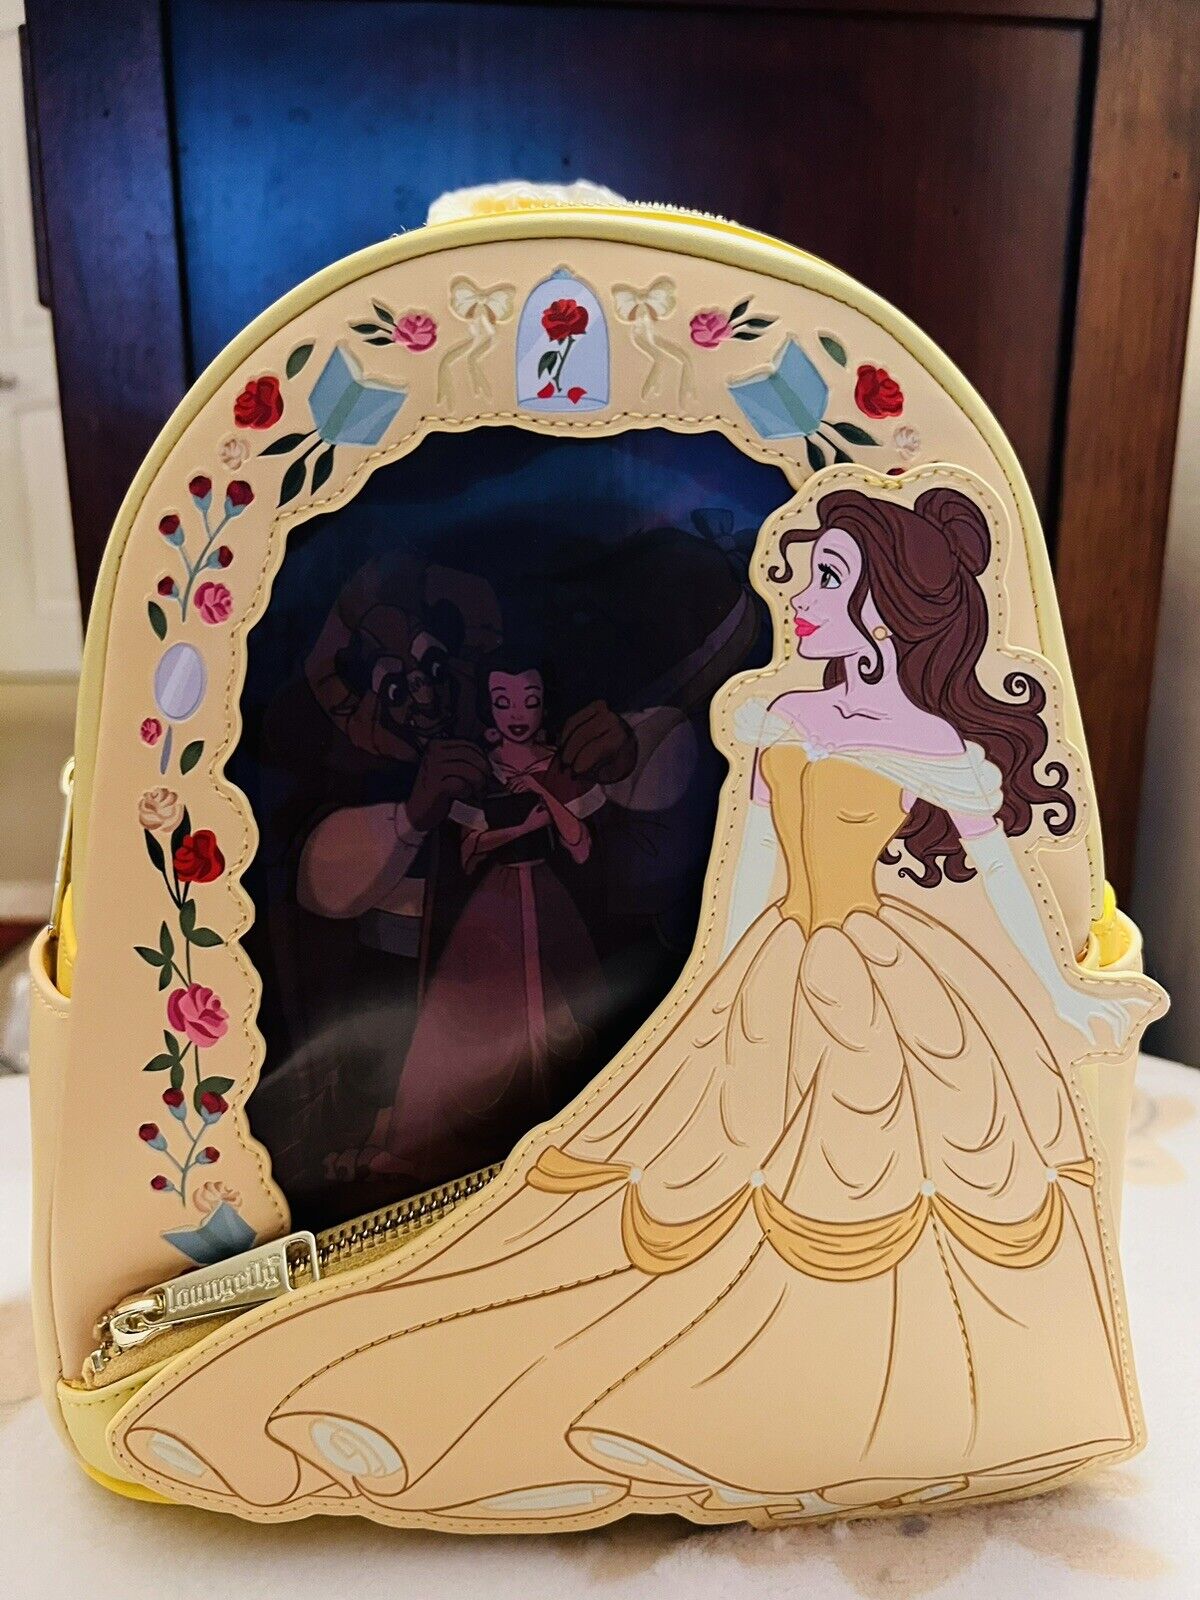 Loungefly Disney Beauty and the Beast Belle Princess Lenticular Mini Backpack